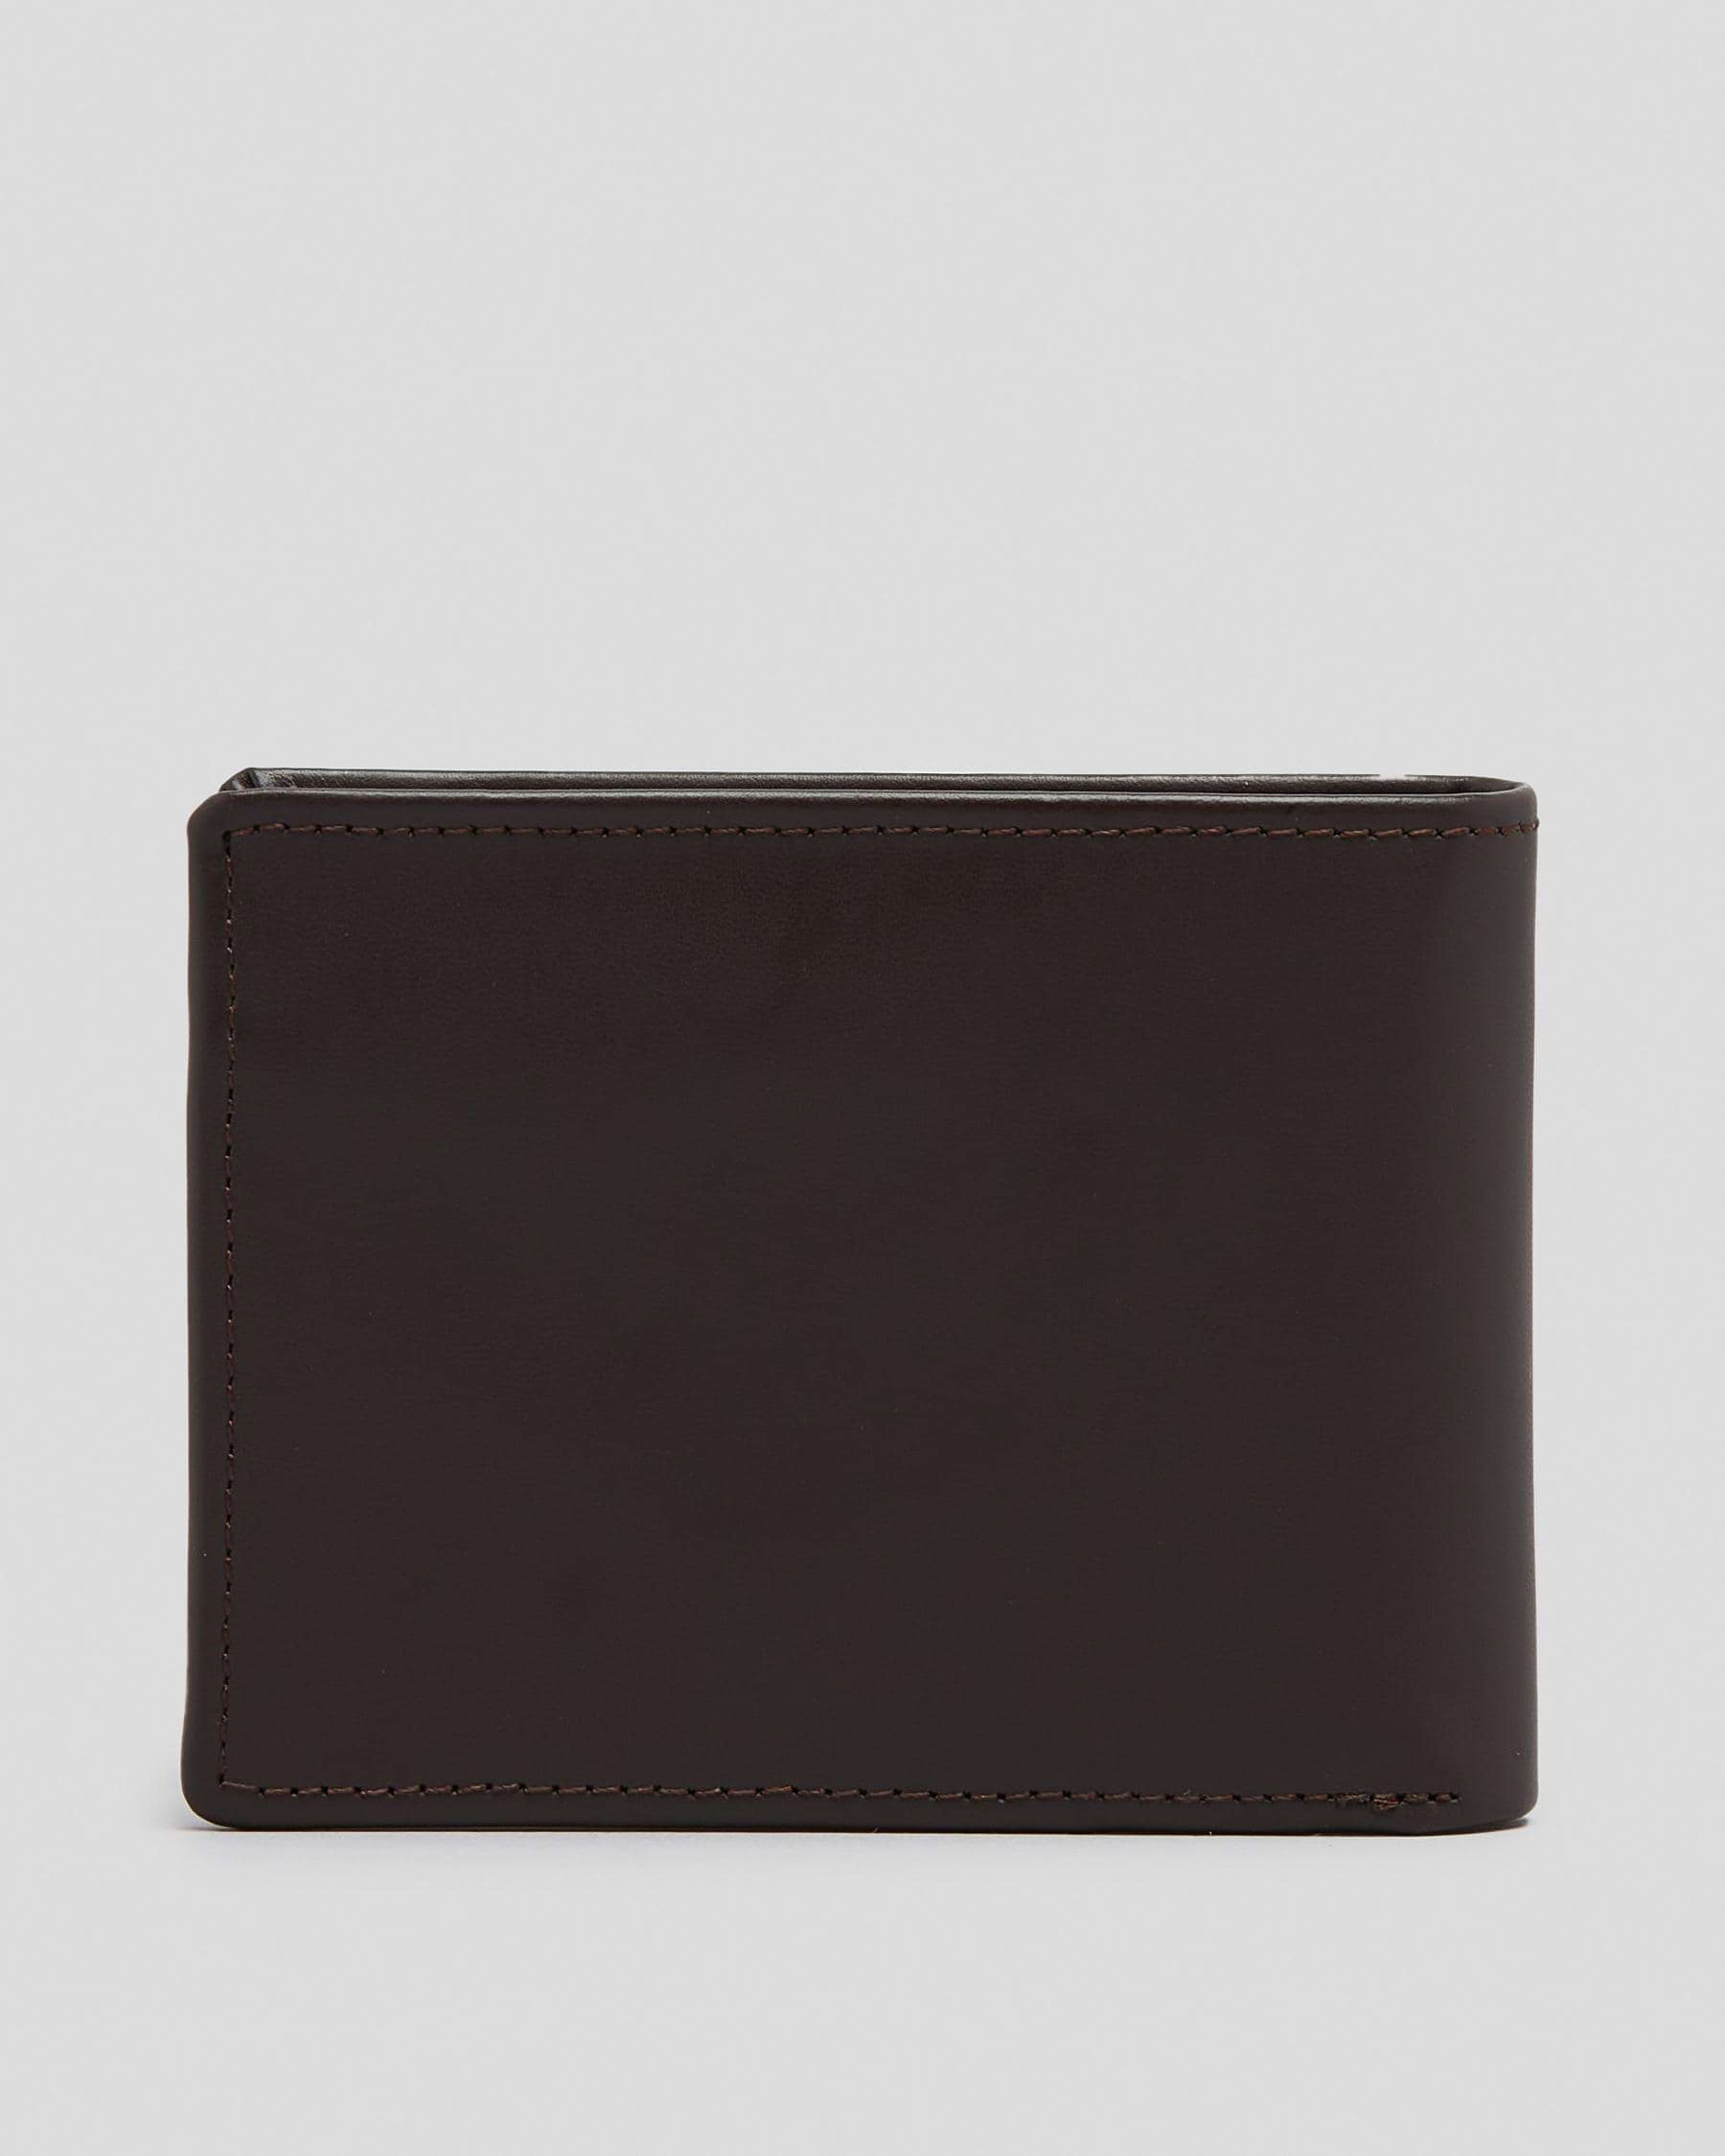 Quiksilver Guthrie IV Wallet In Chocolate Brown - Fast Shipping & Easy ...